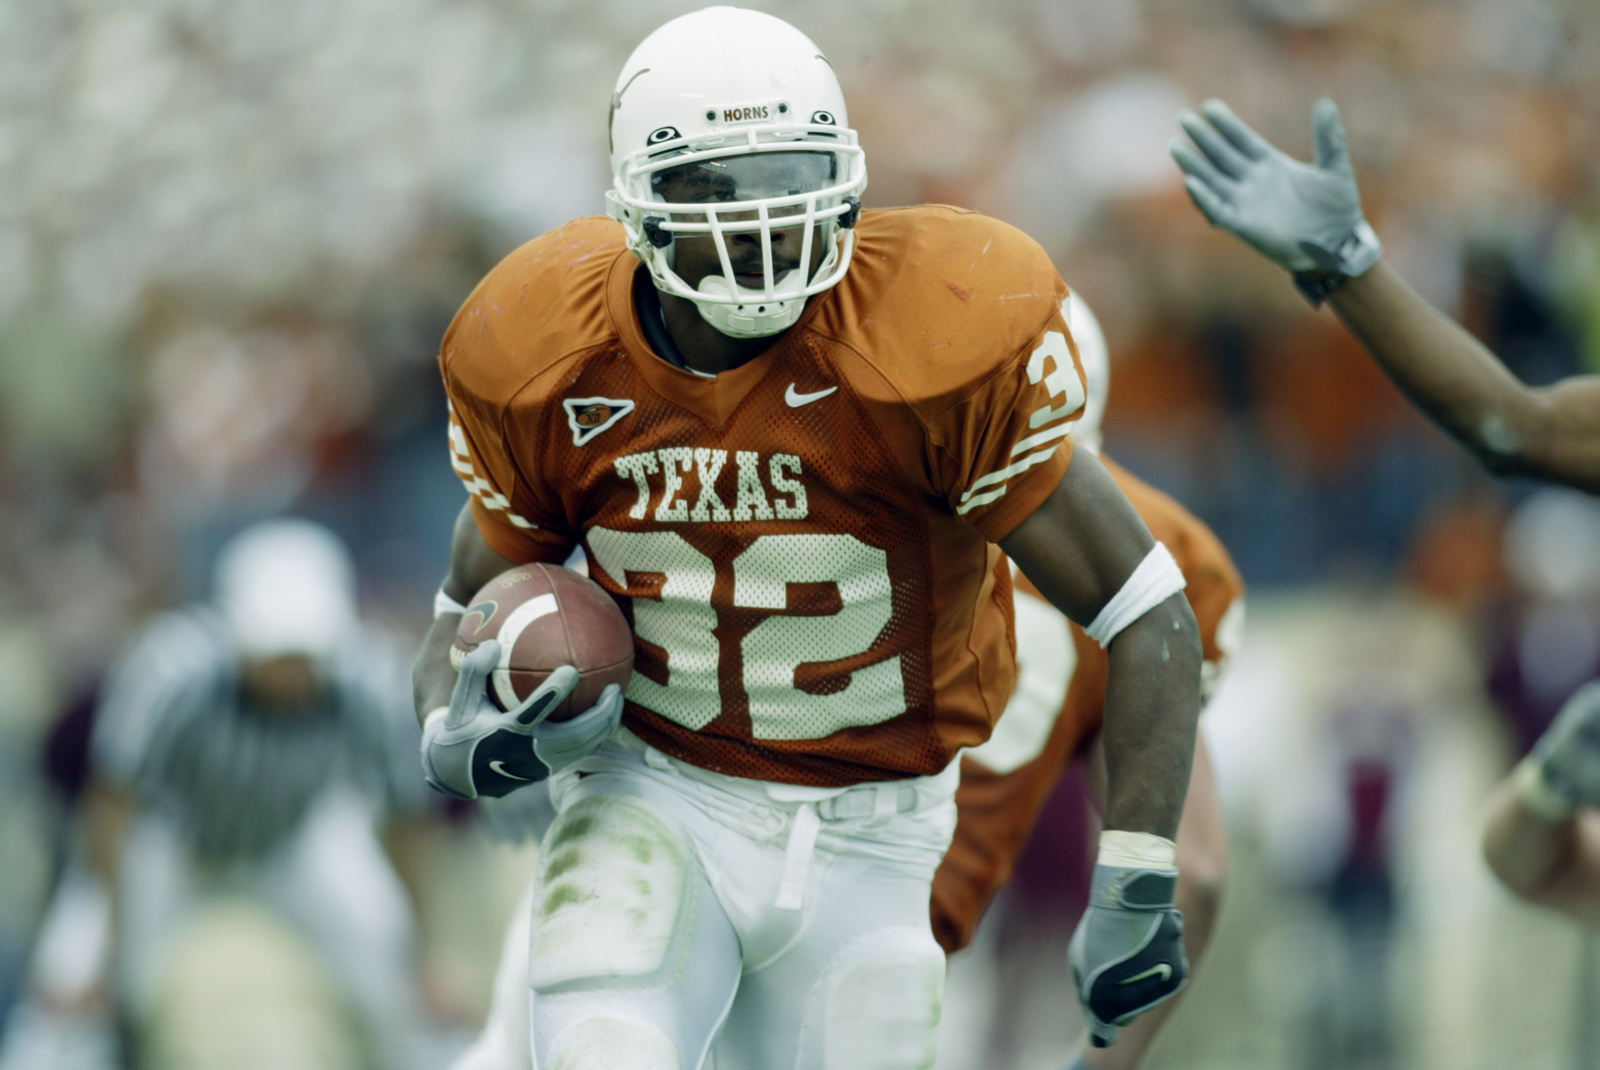 Texas Football: 10 best moments in the career of RB Cedric Benson